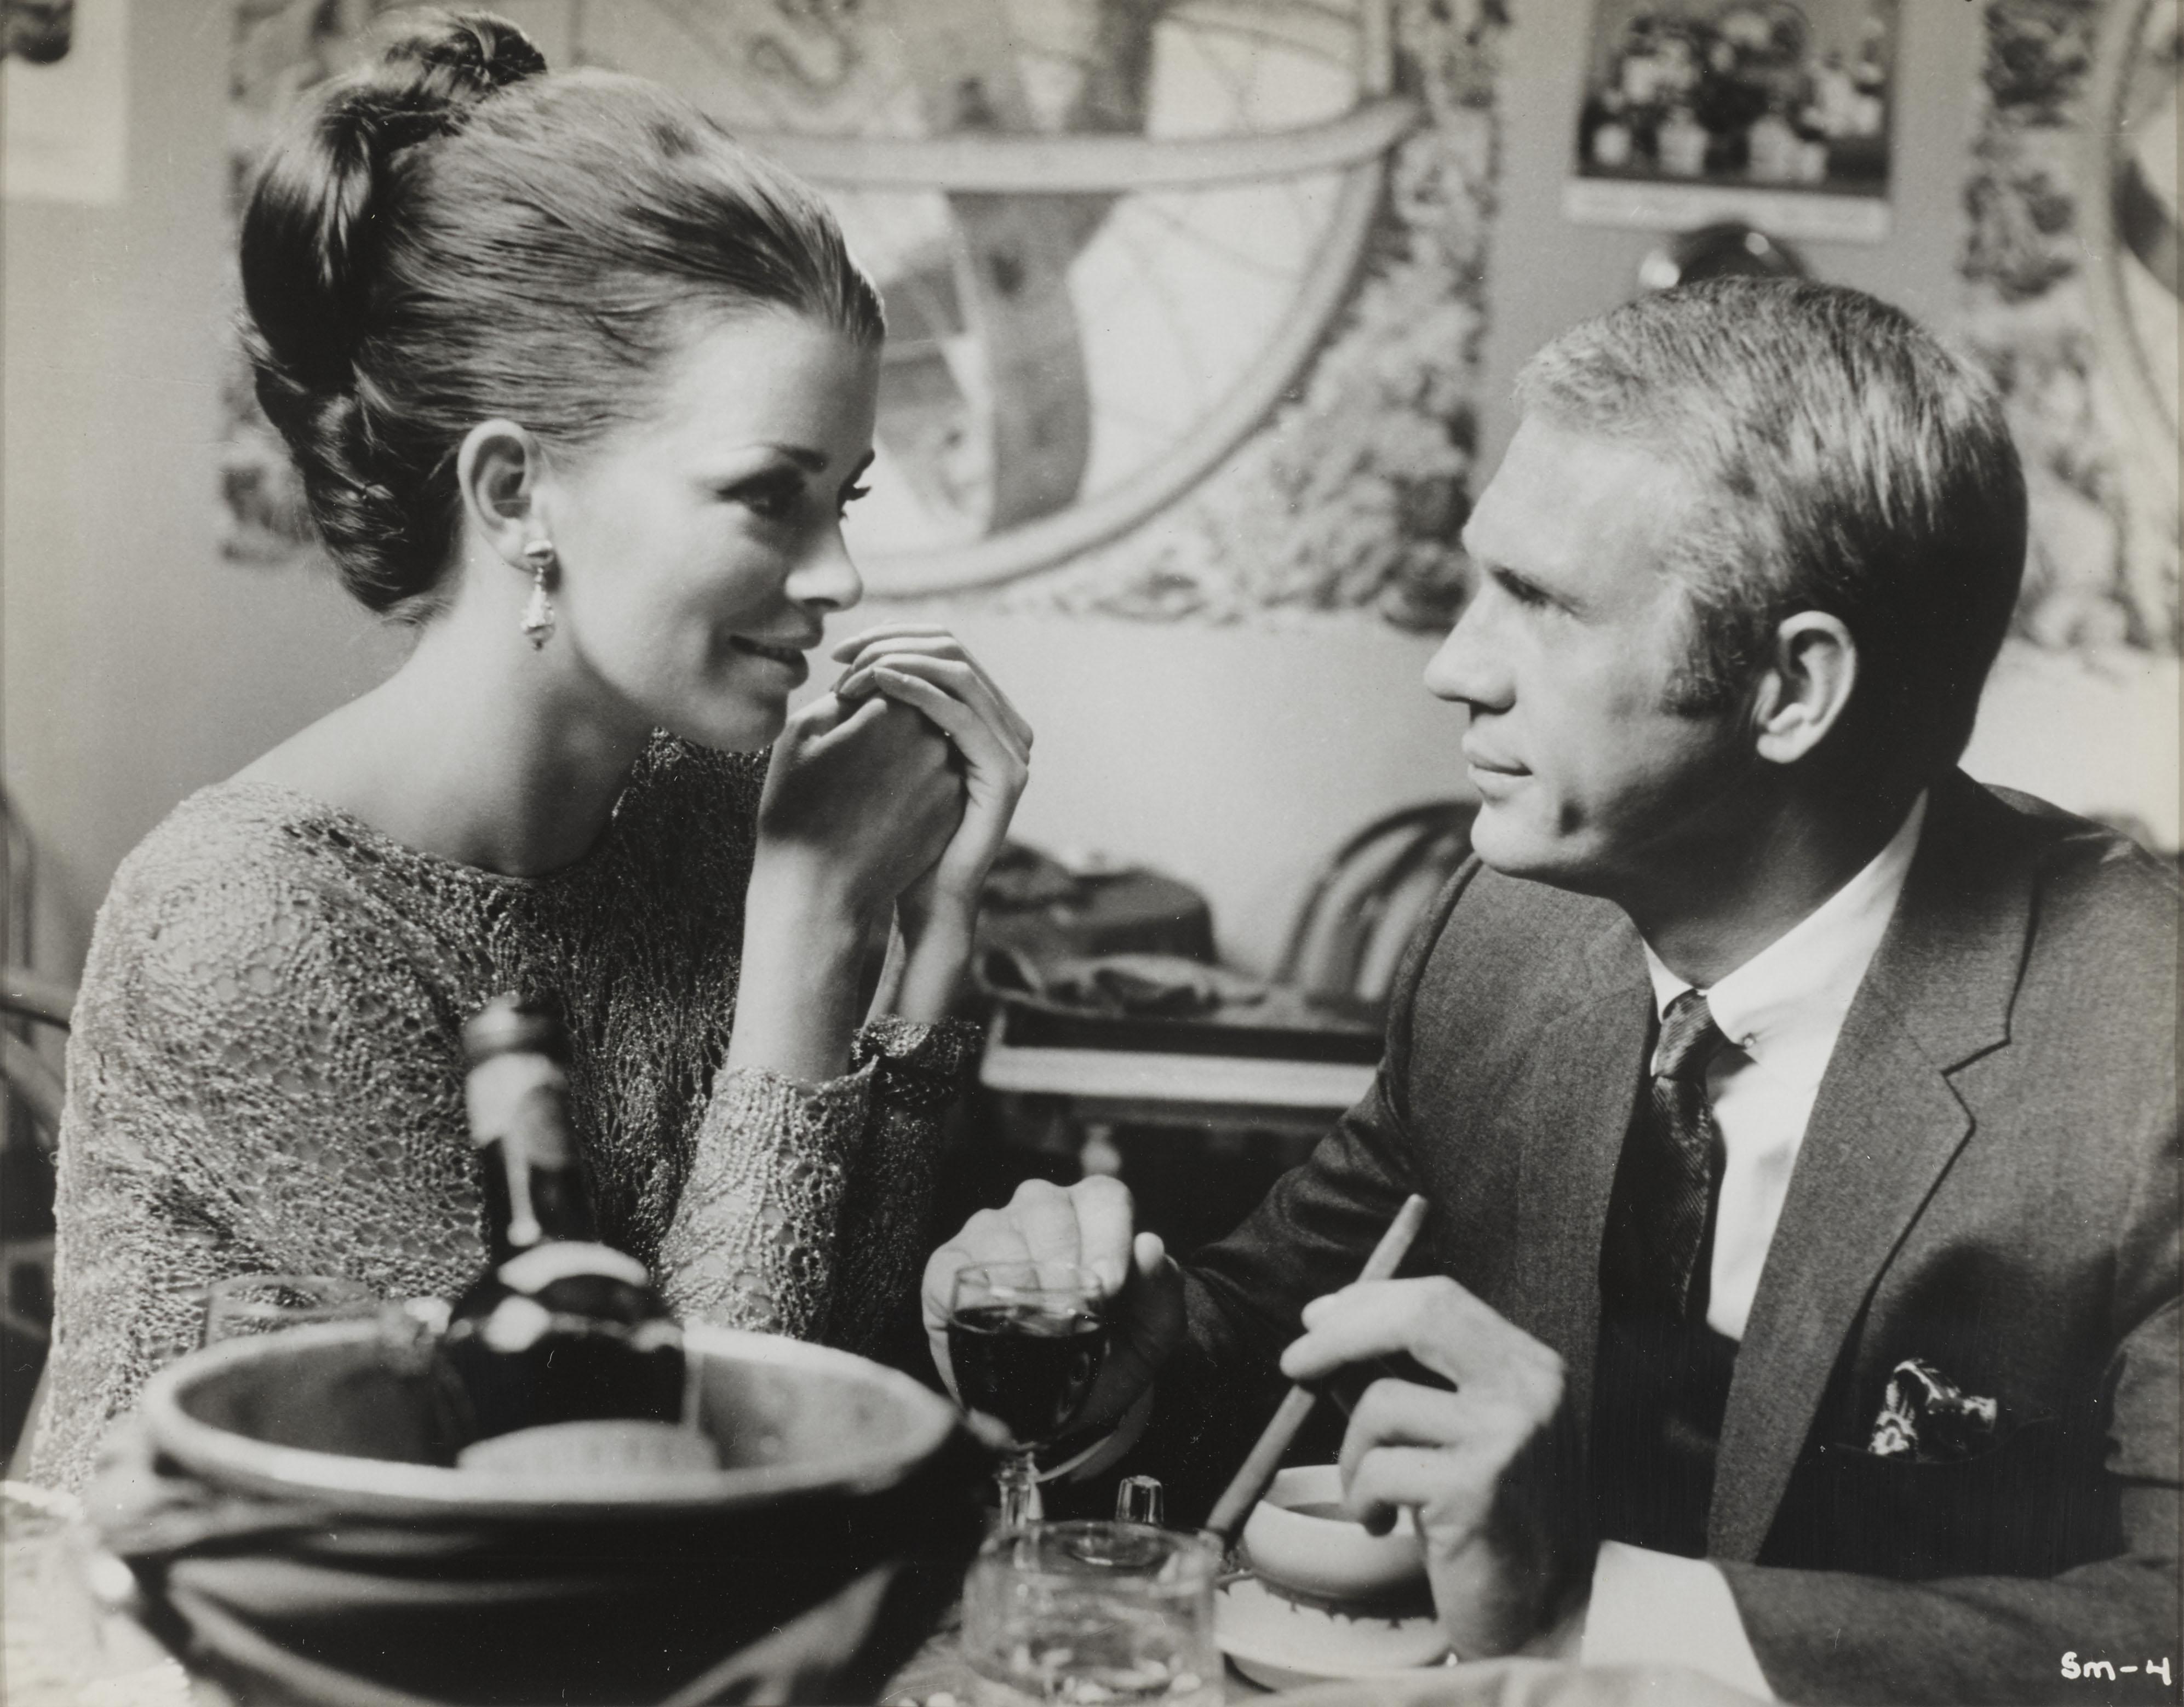 Original US studio production photo for The Thomas Crown Affair 1968.
This film starred Steve McQueen and Faye Dunaway,  and was directed by Norman Jewison.
This piece is conservation framed with UV Plexiglas and would be shipped boxed by Federal